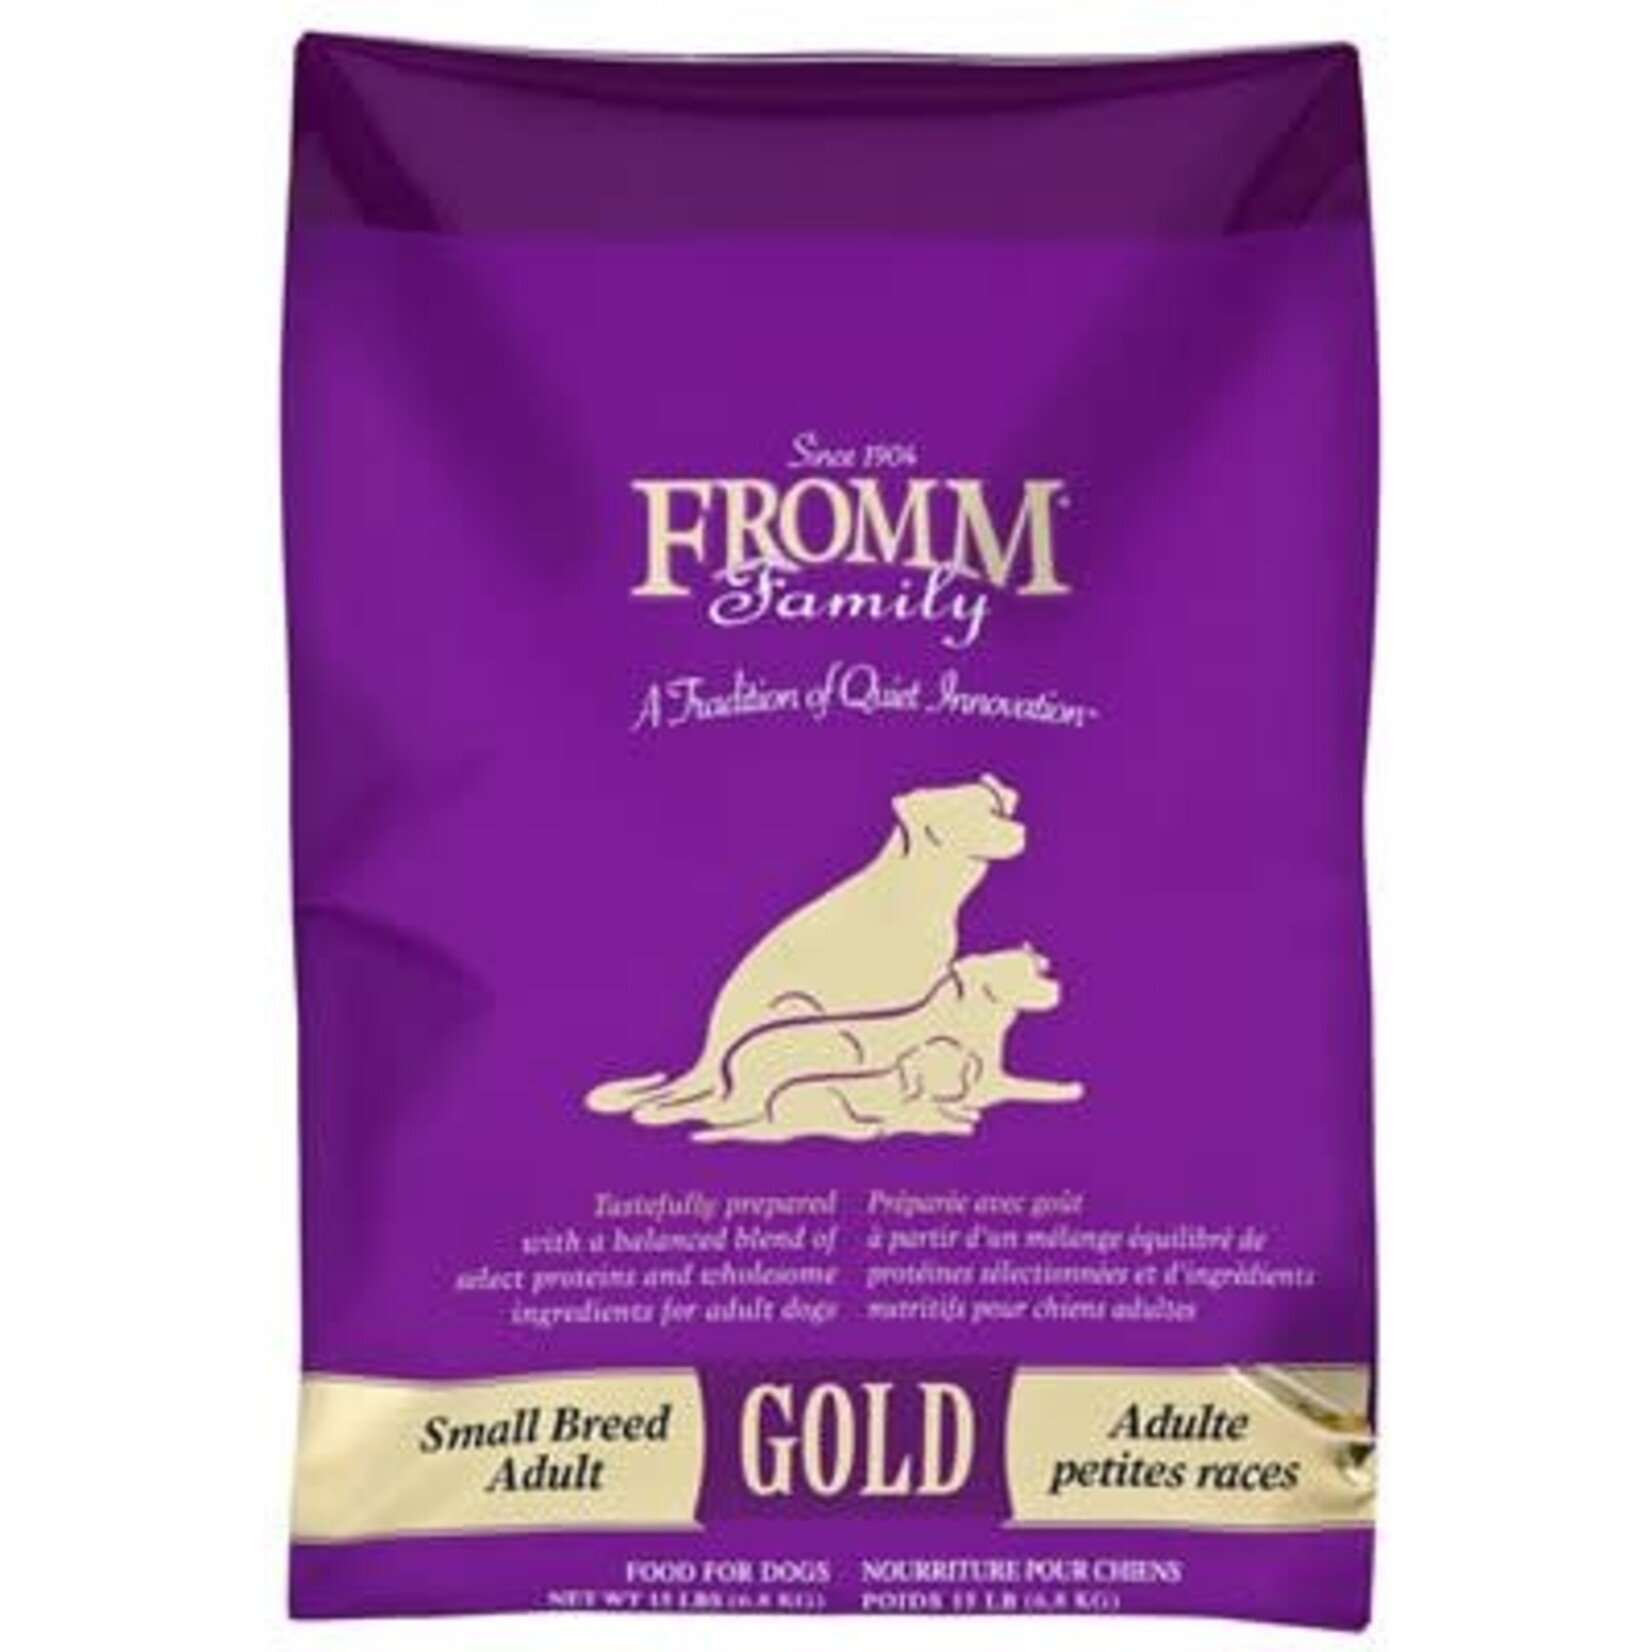 FROMM FROMM GOLD CHIEN ADULTE PETITE RACE 6.8 KG